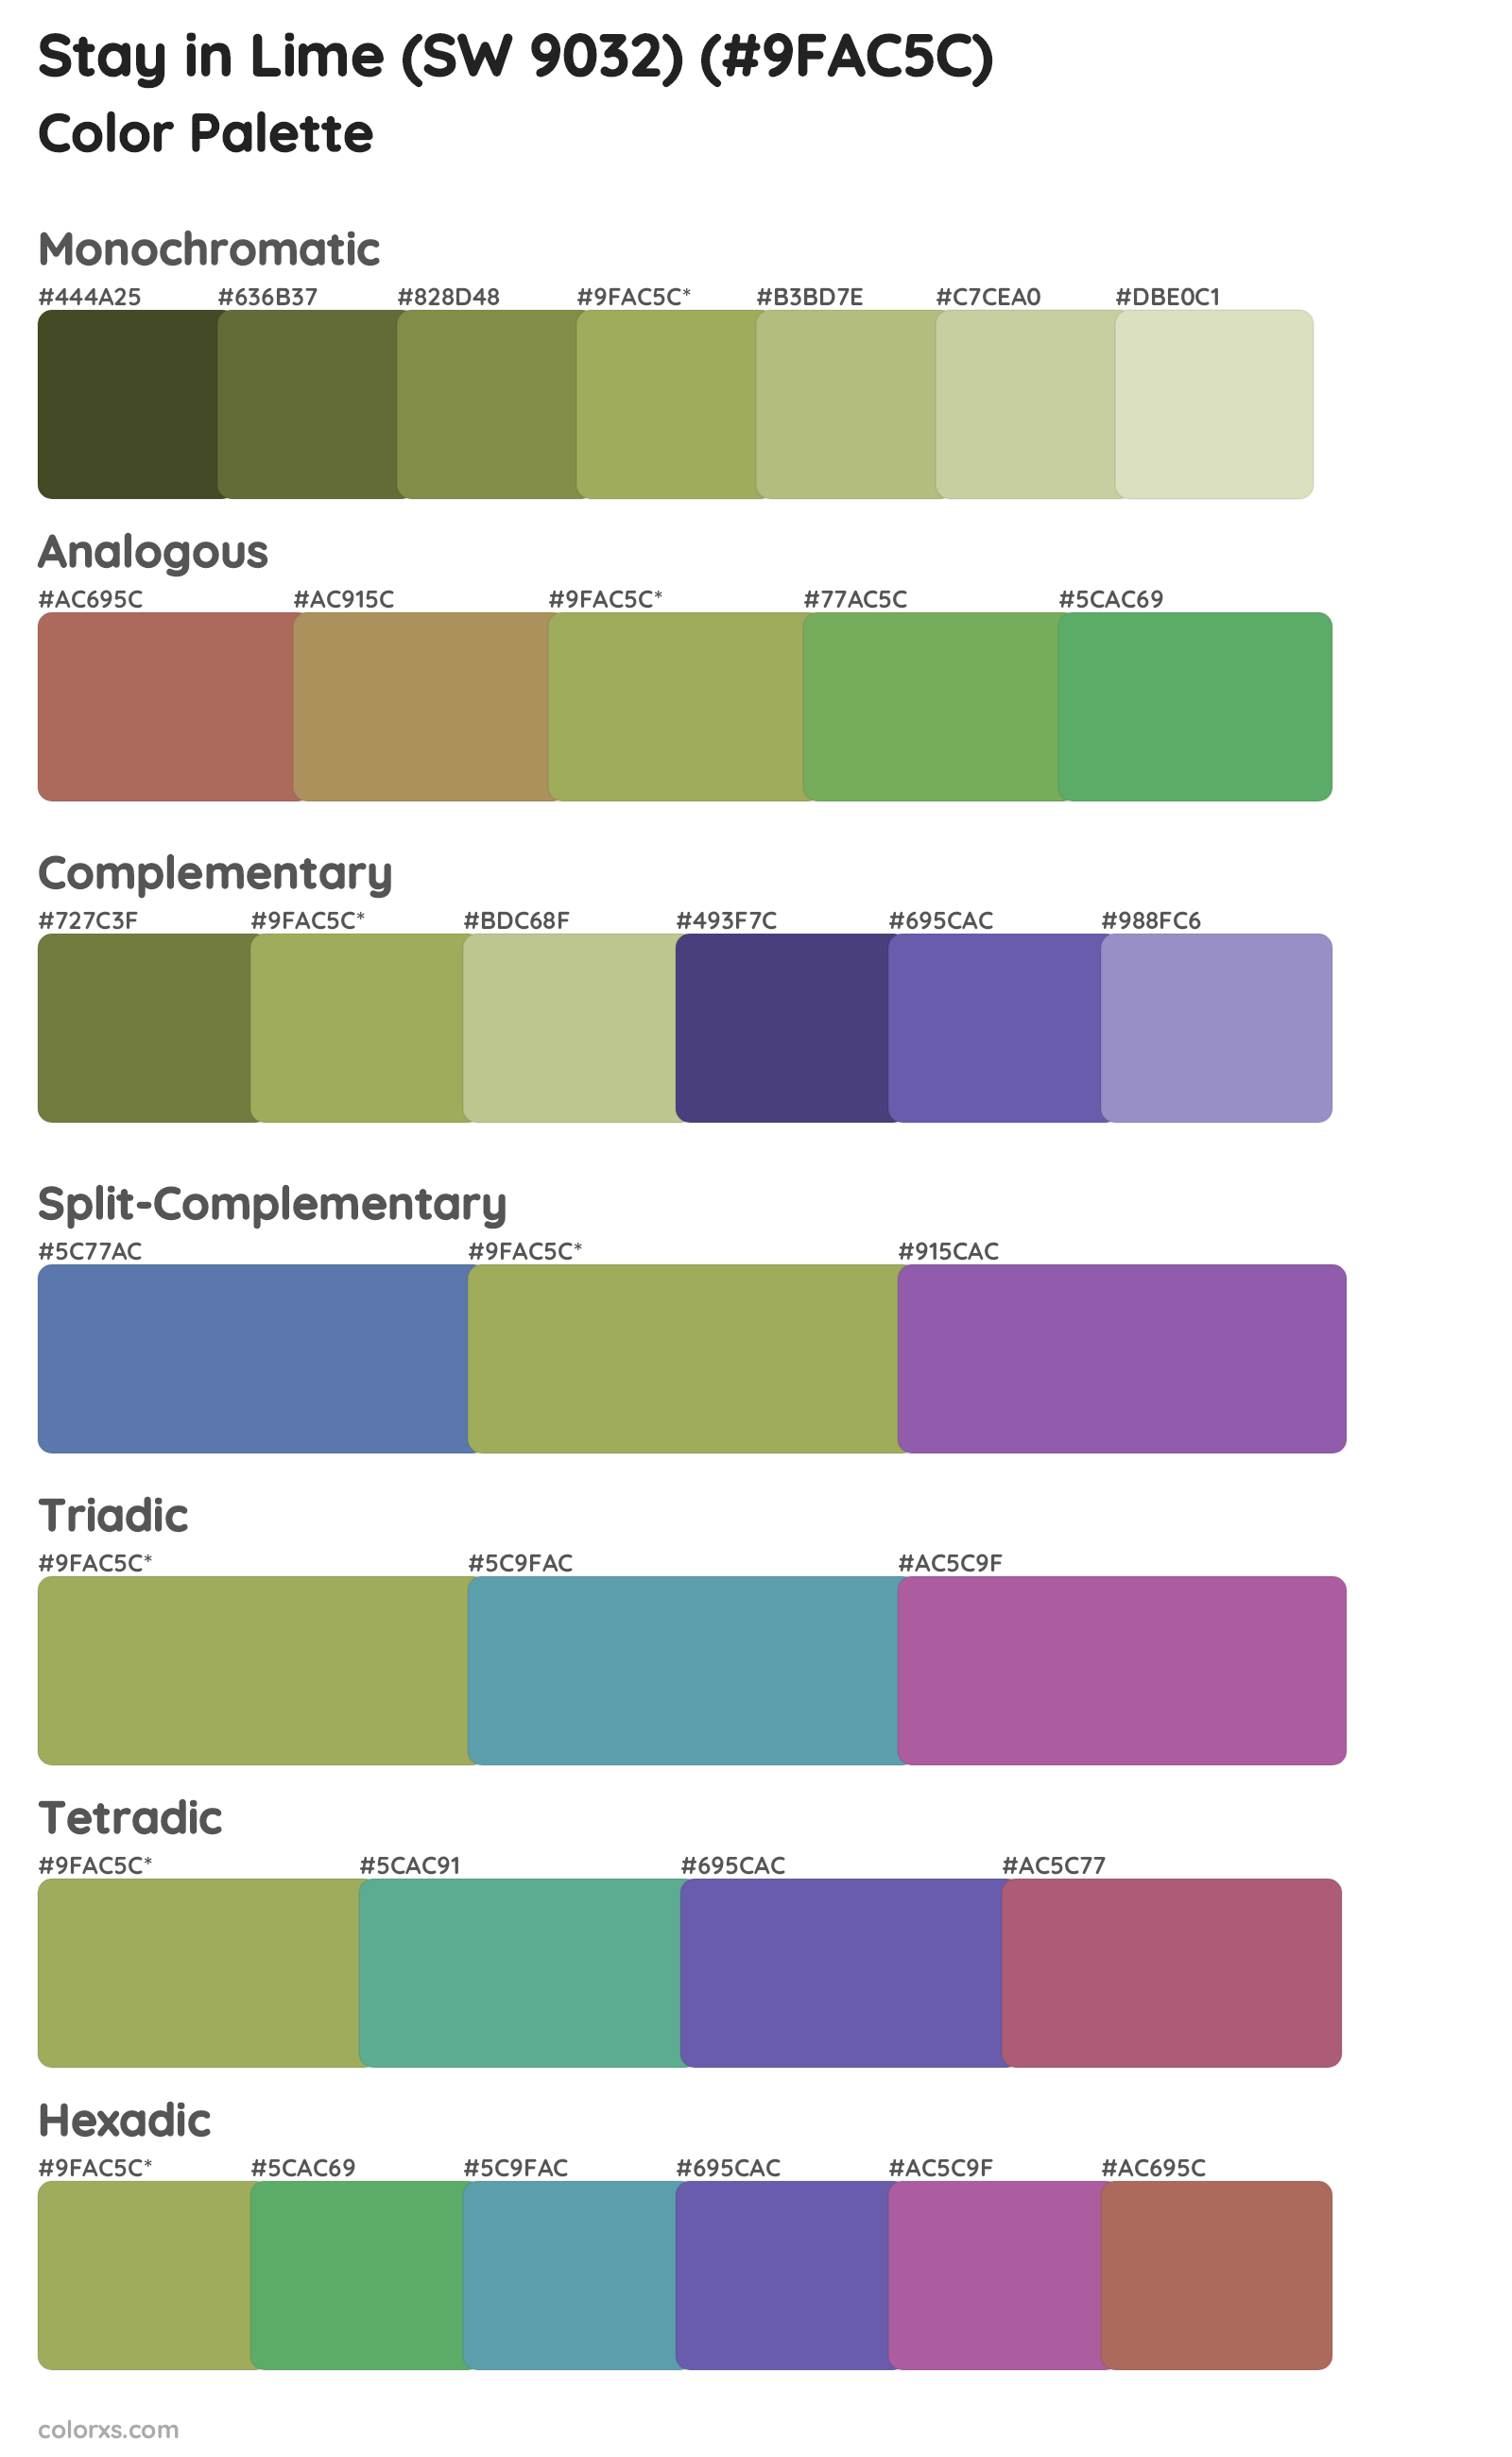 Stay in Lime (SW 9032) Color Scheme Palettes